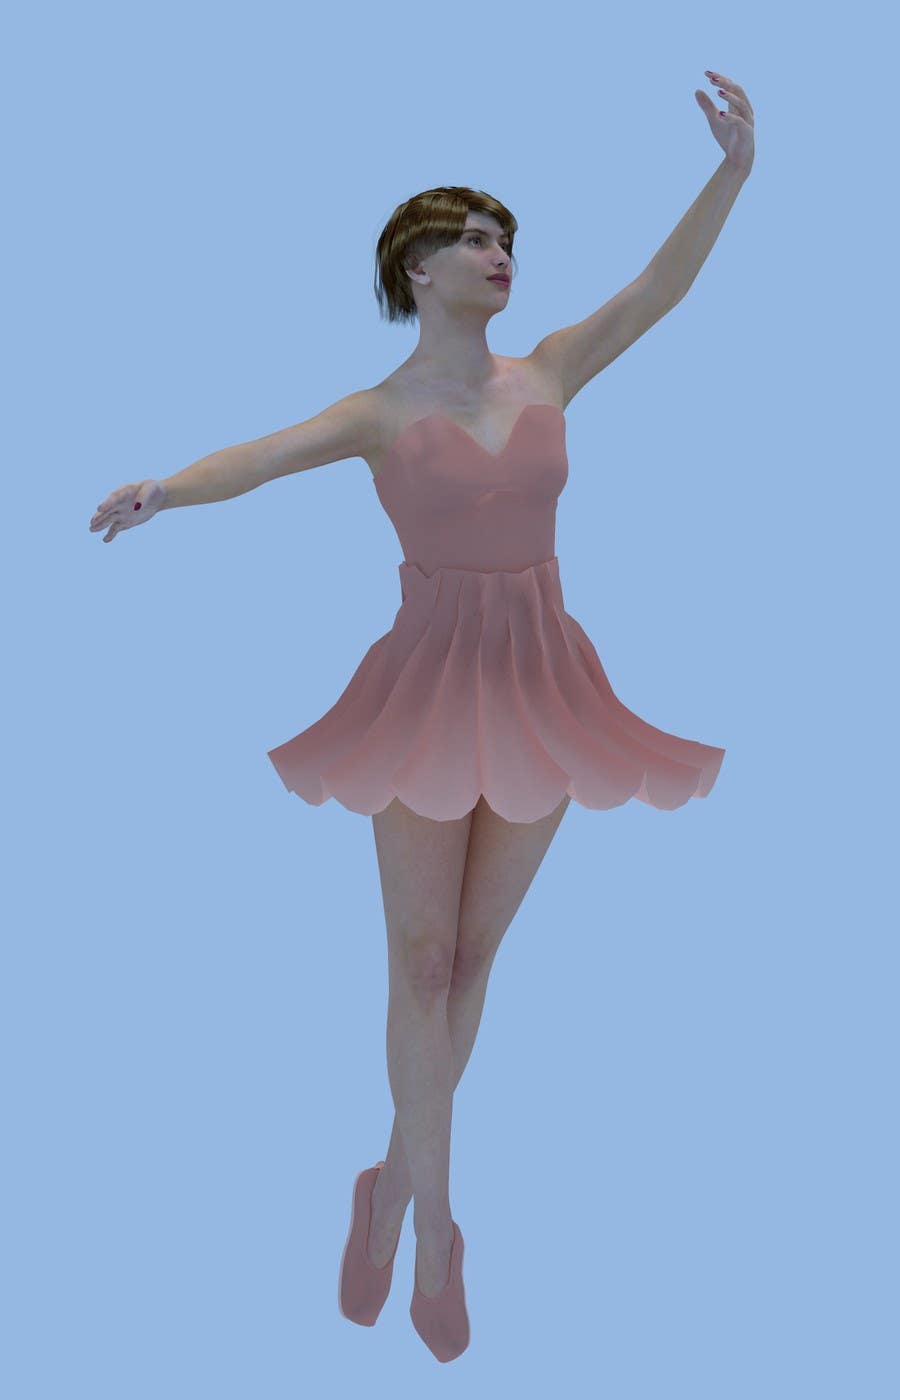 
                                                                                                                        Konkurrenceindlæg #                                            2
                                         for                                             Illustrate a realistic ballet dancer costume and legs for printing
                                        